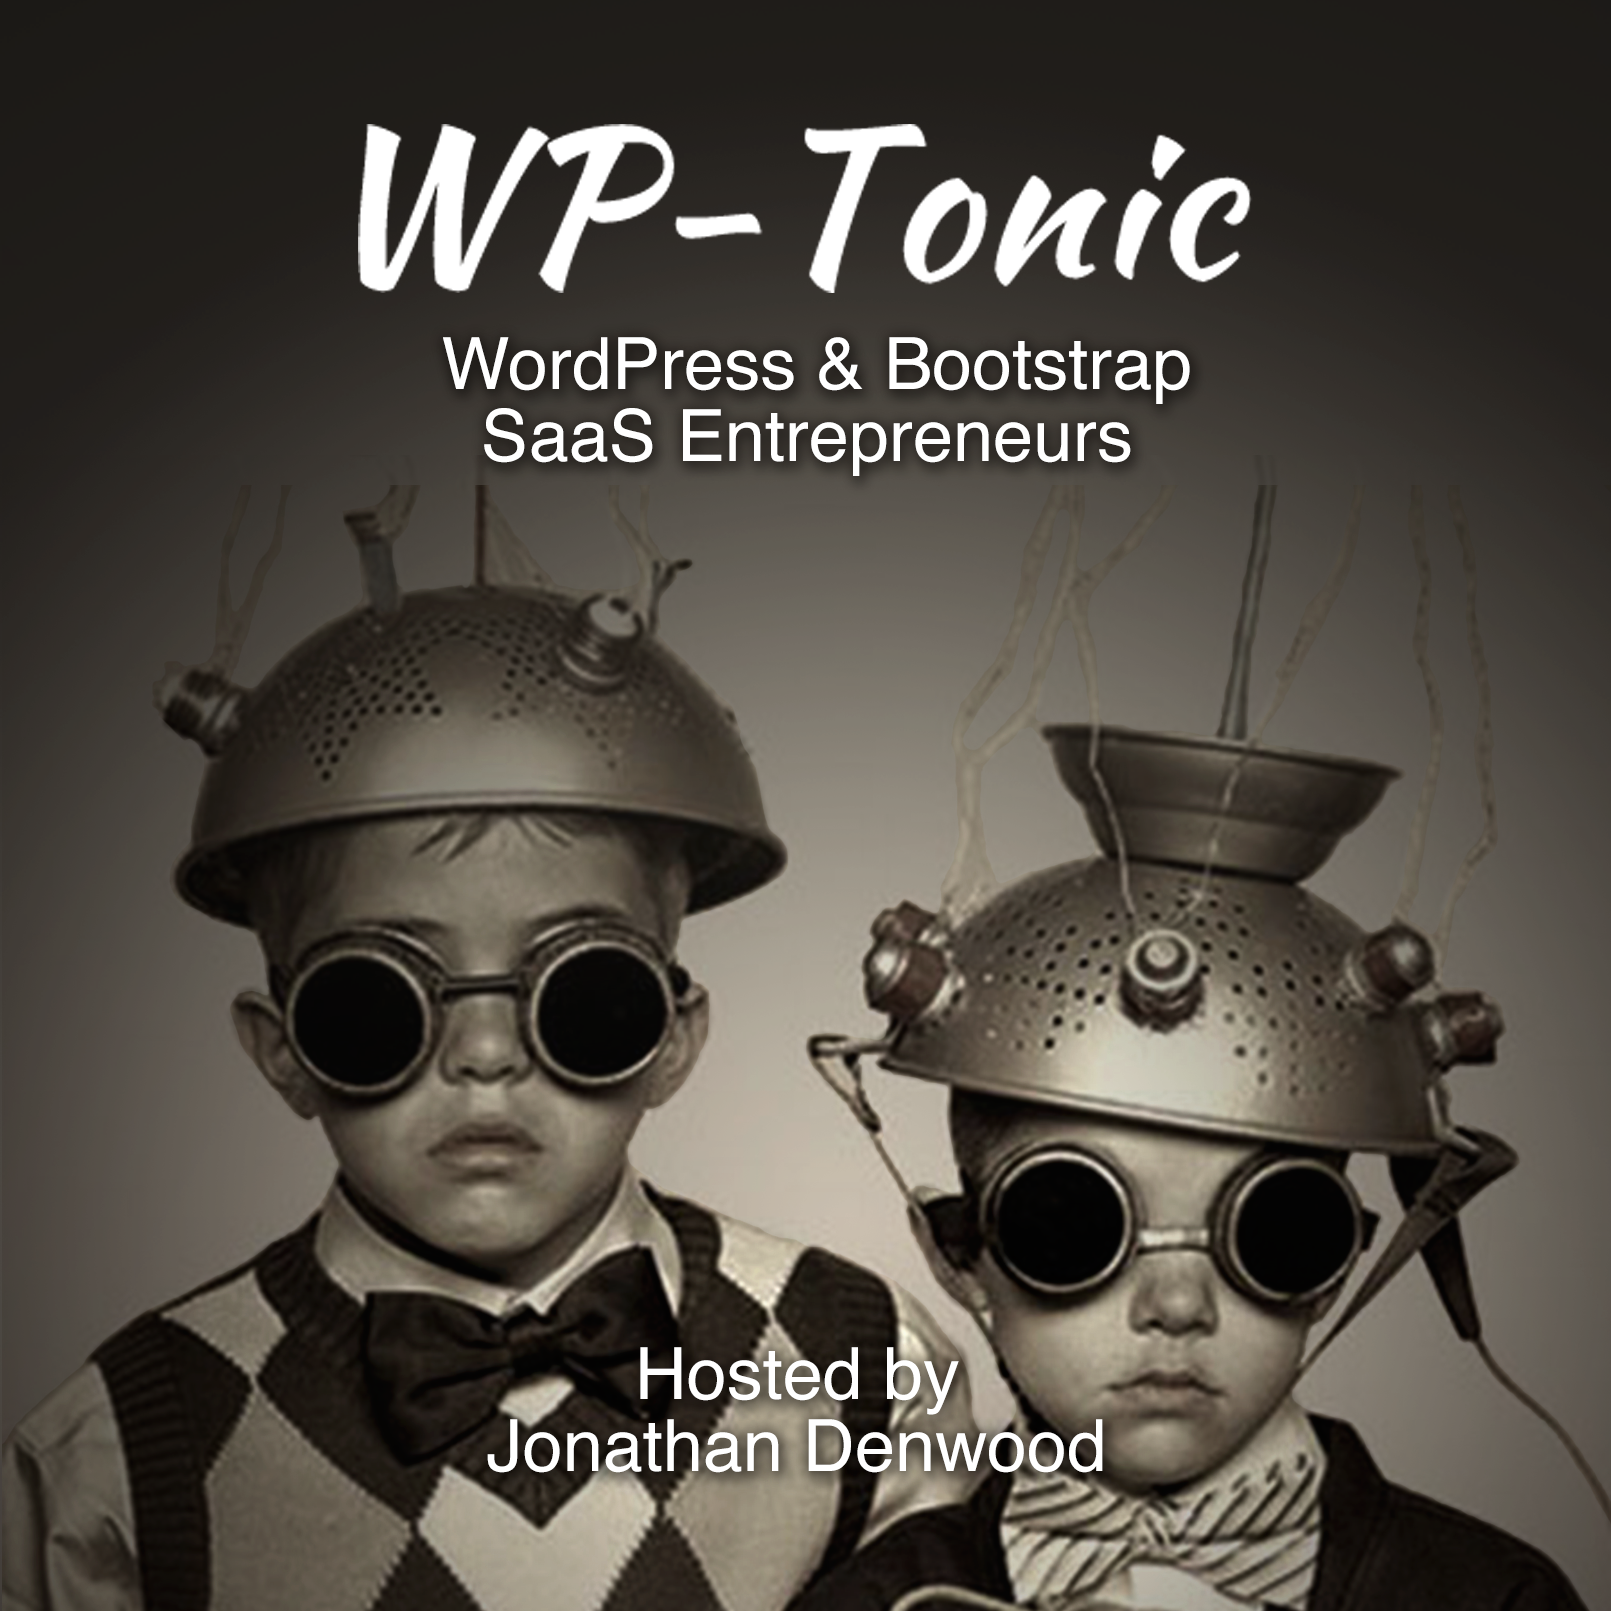 #497 WP-Tonic Round-Table Show on Friday, May the 22rd, 2020 at 8:30 am PST